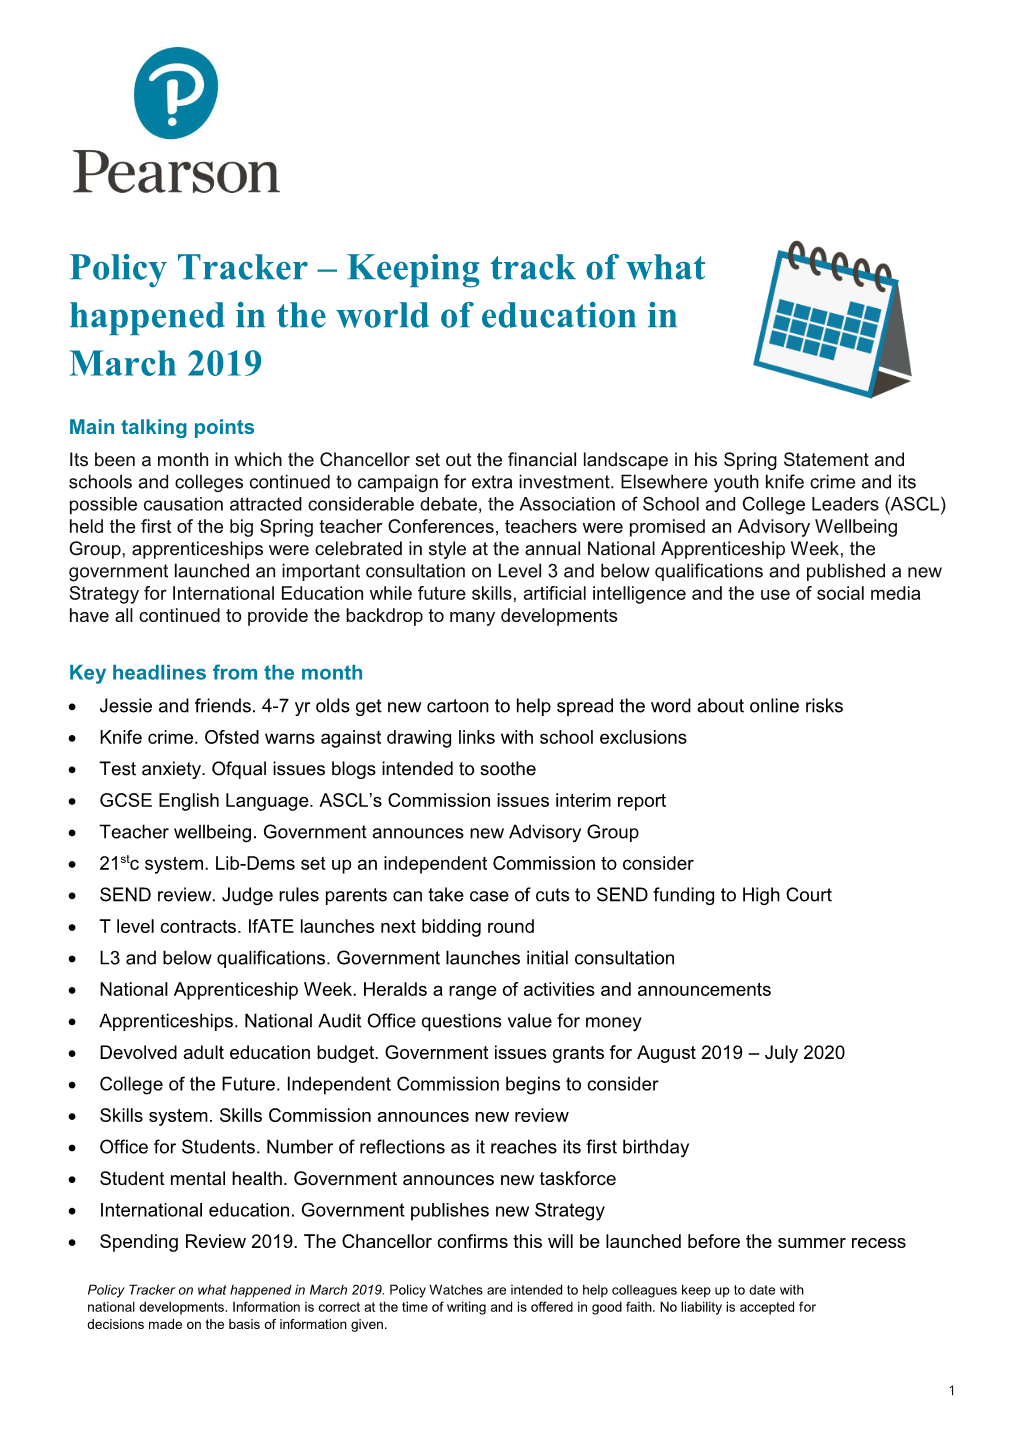 Policy Tracker – Keeping Track of What Happened in the World of Education in March 2019